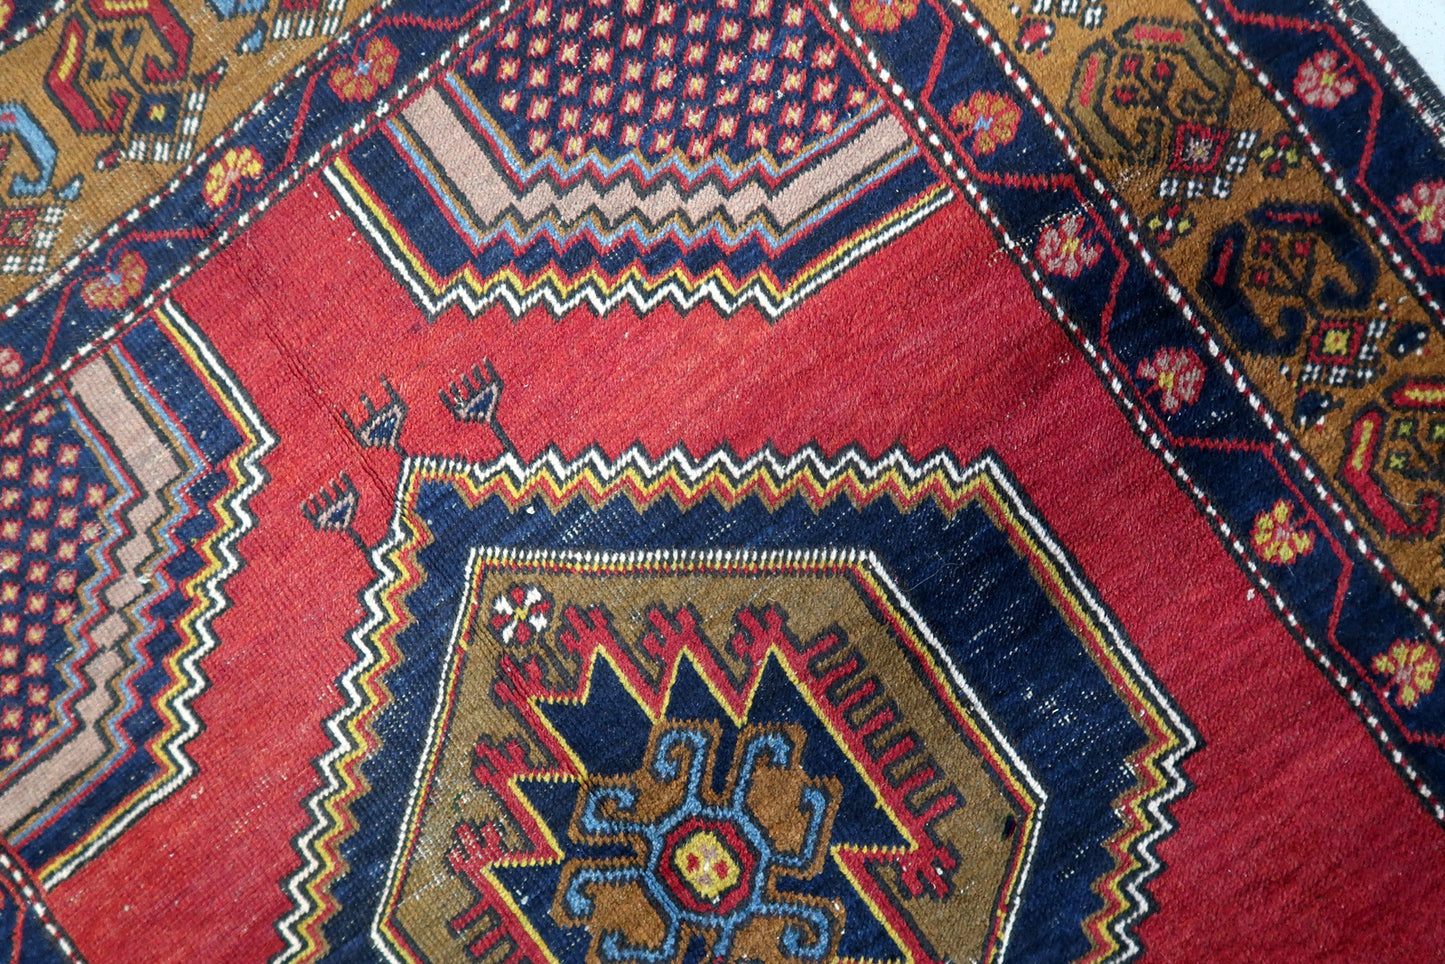 Close-up of one of the geometric shapes in the center, revealing its intricate patterns